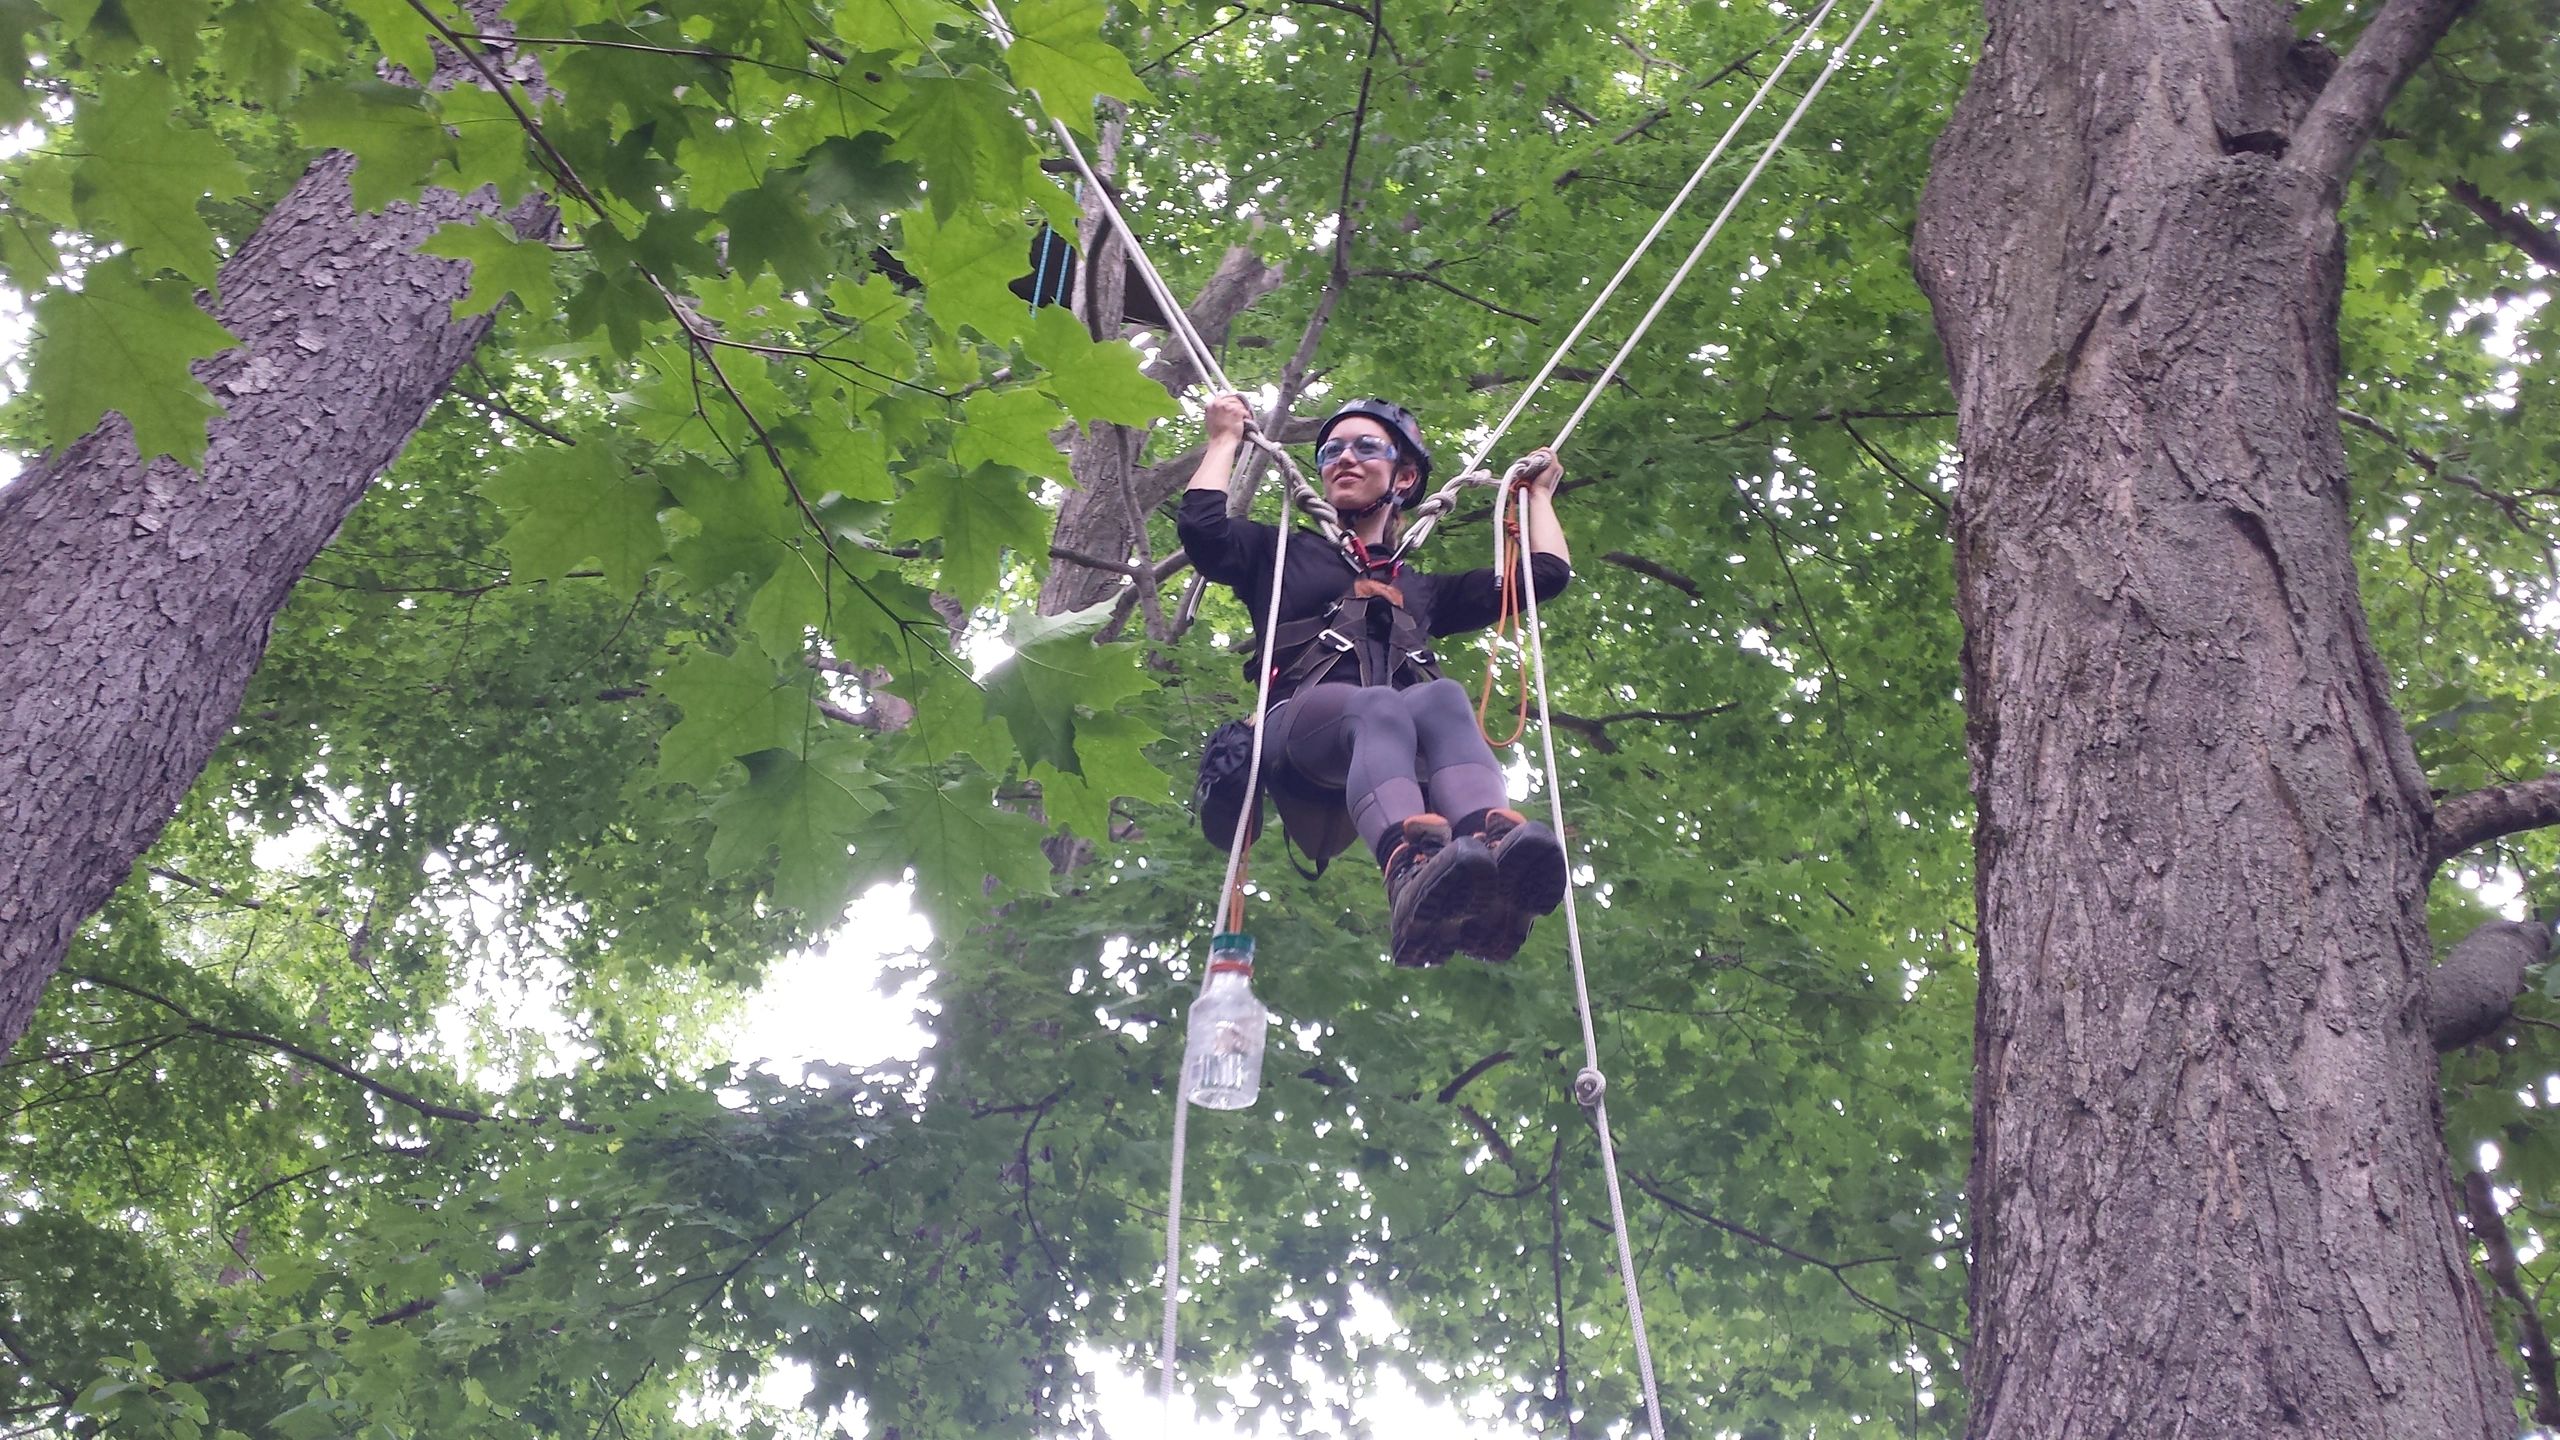 Freeworker Blog » On a strong line: Tree climbing ropes in tree care